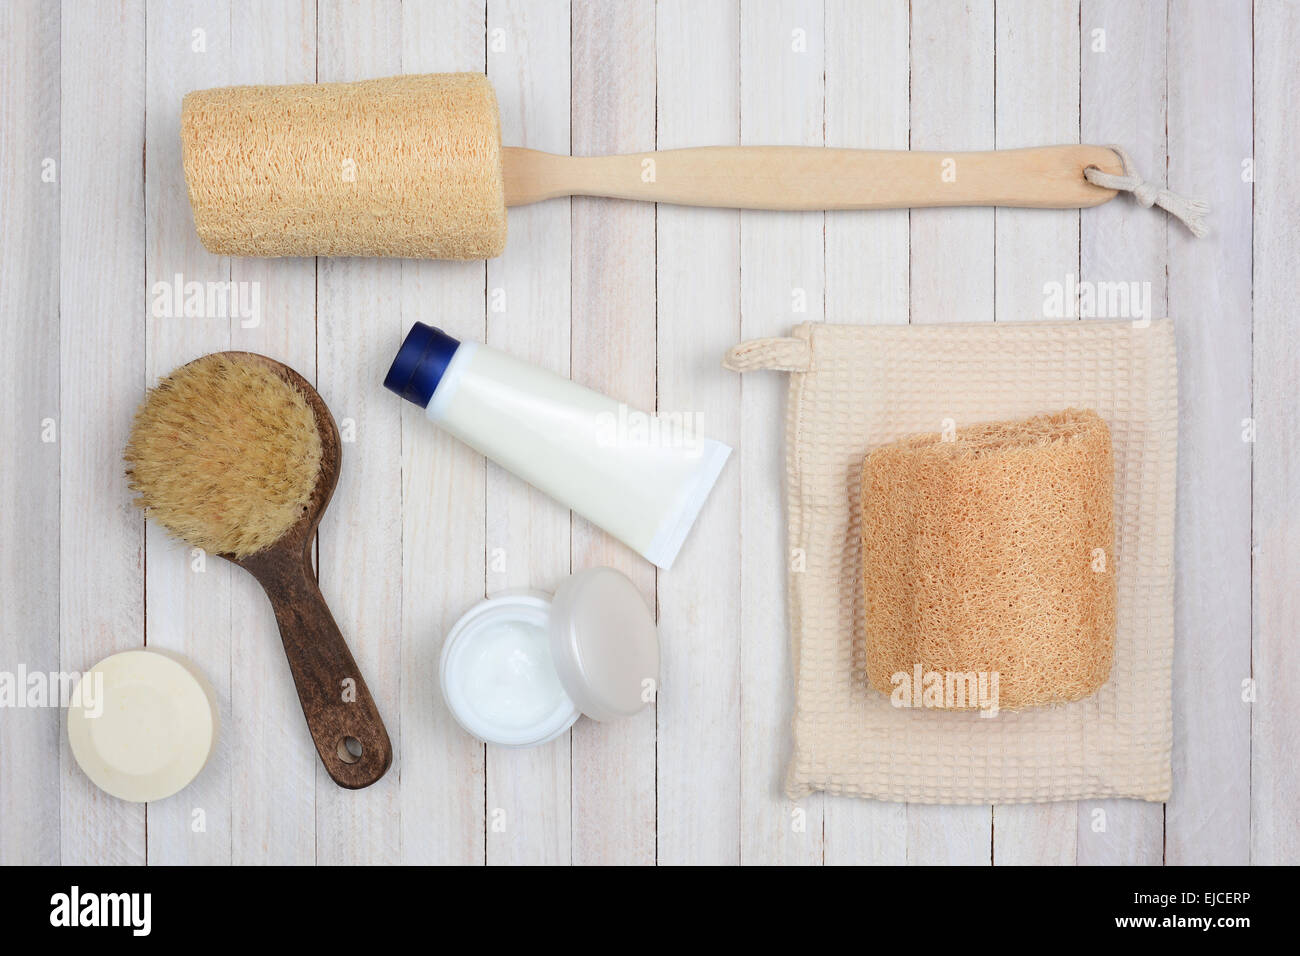 Bath and Spa accessories on a white rustic wood surface. Items include: luffa, brush, creams and soap. Stock Photo